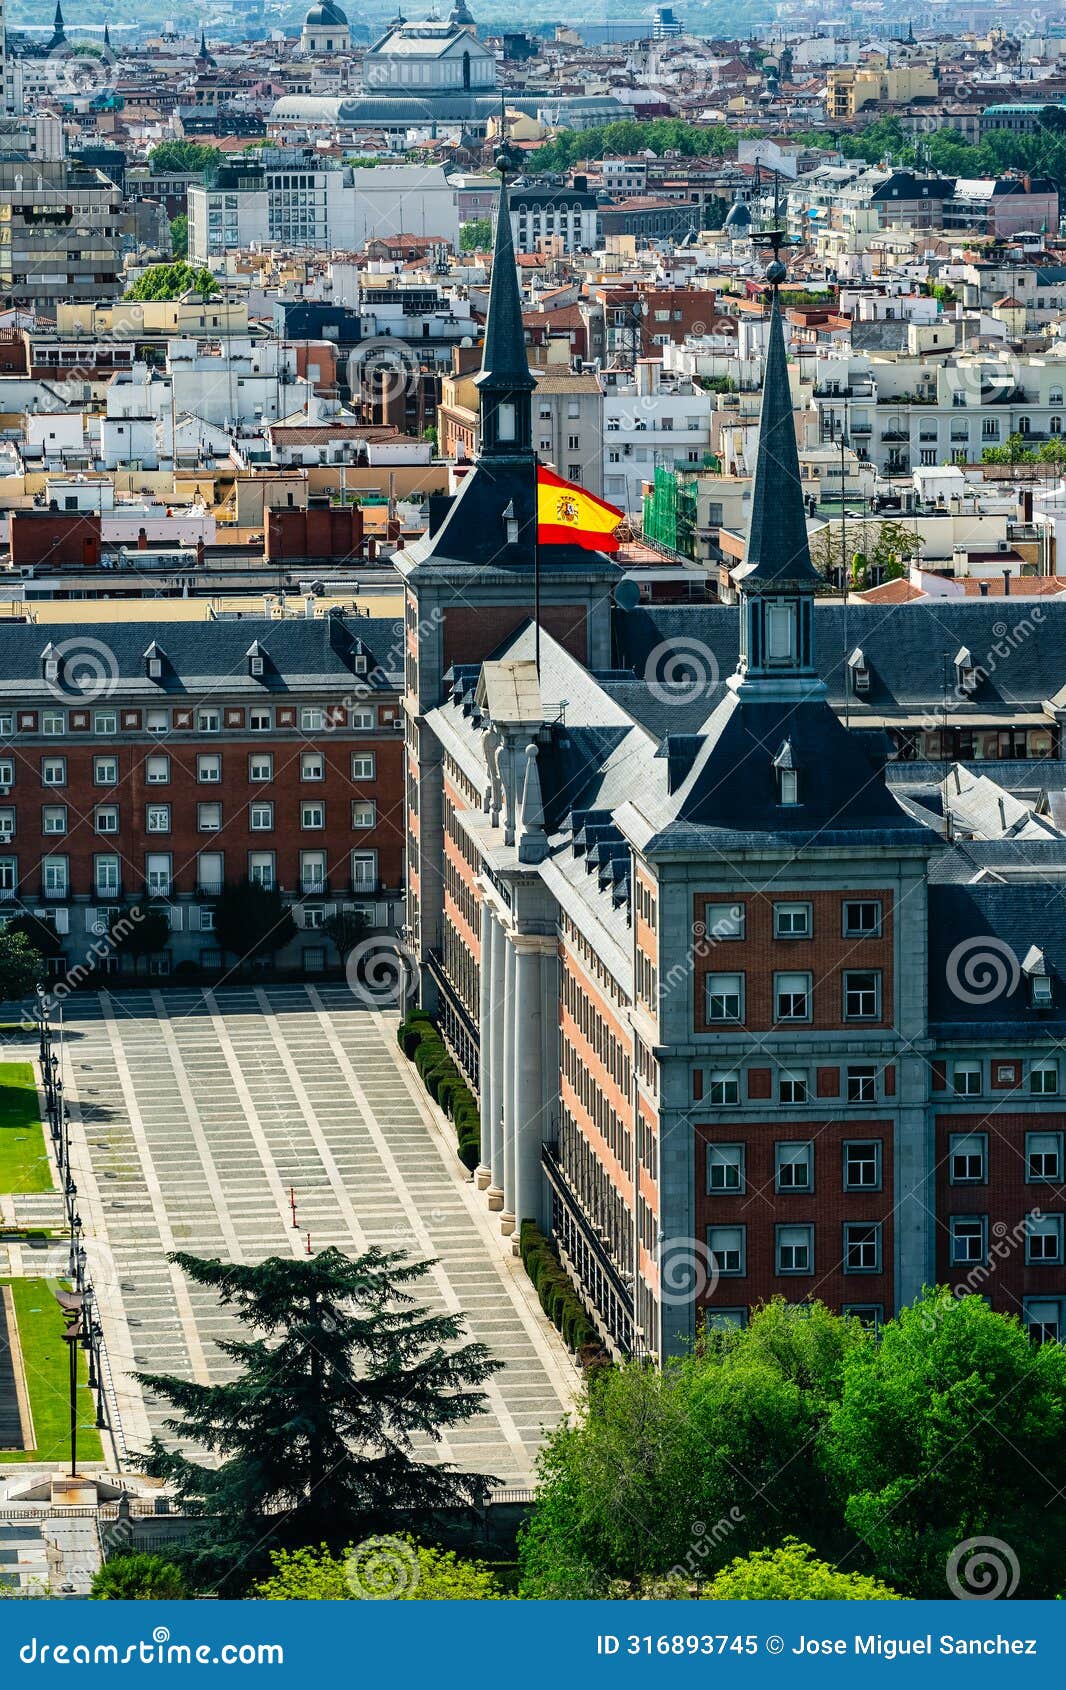 historic buildings of the city of madrid at the entrance to the city on the road to la coruna,